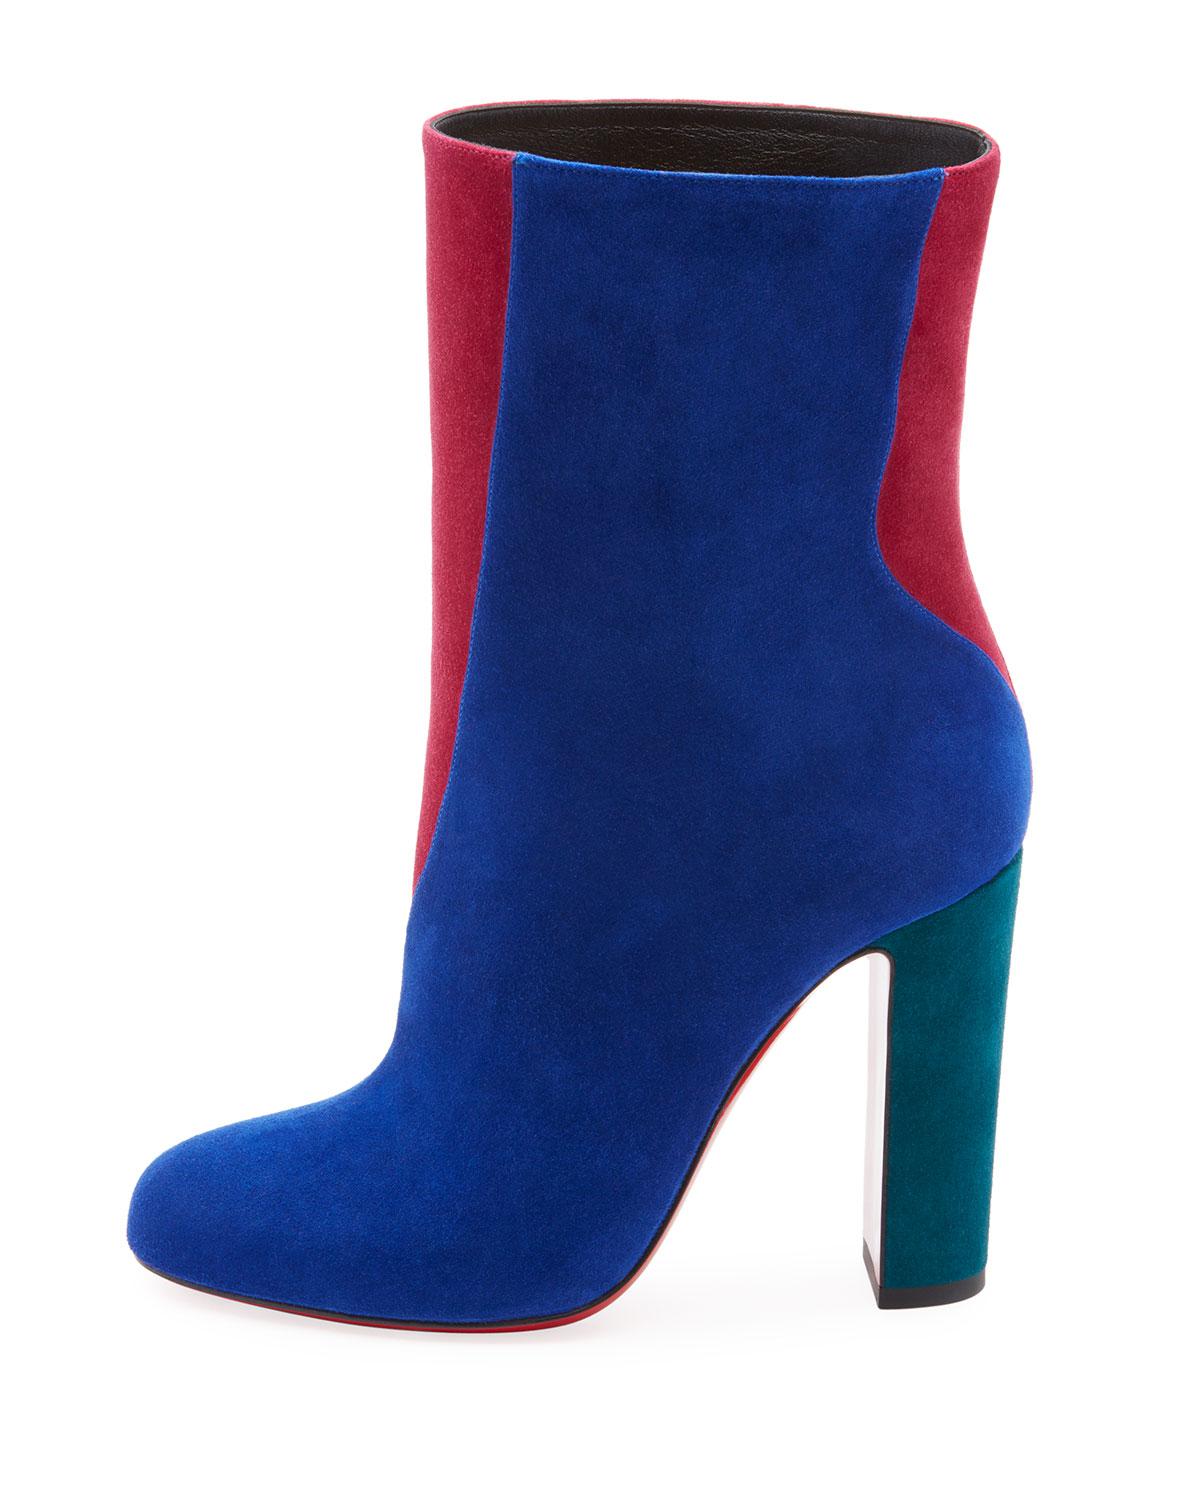 Christian Louboutin Botty Double Colorblock Suede Red Sole Booties in ...